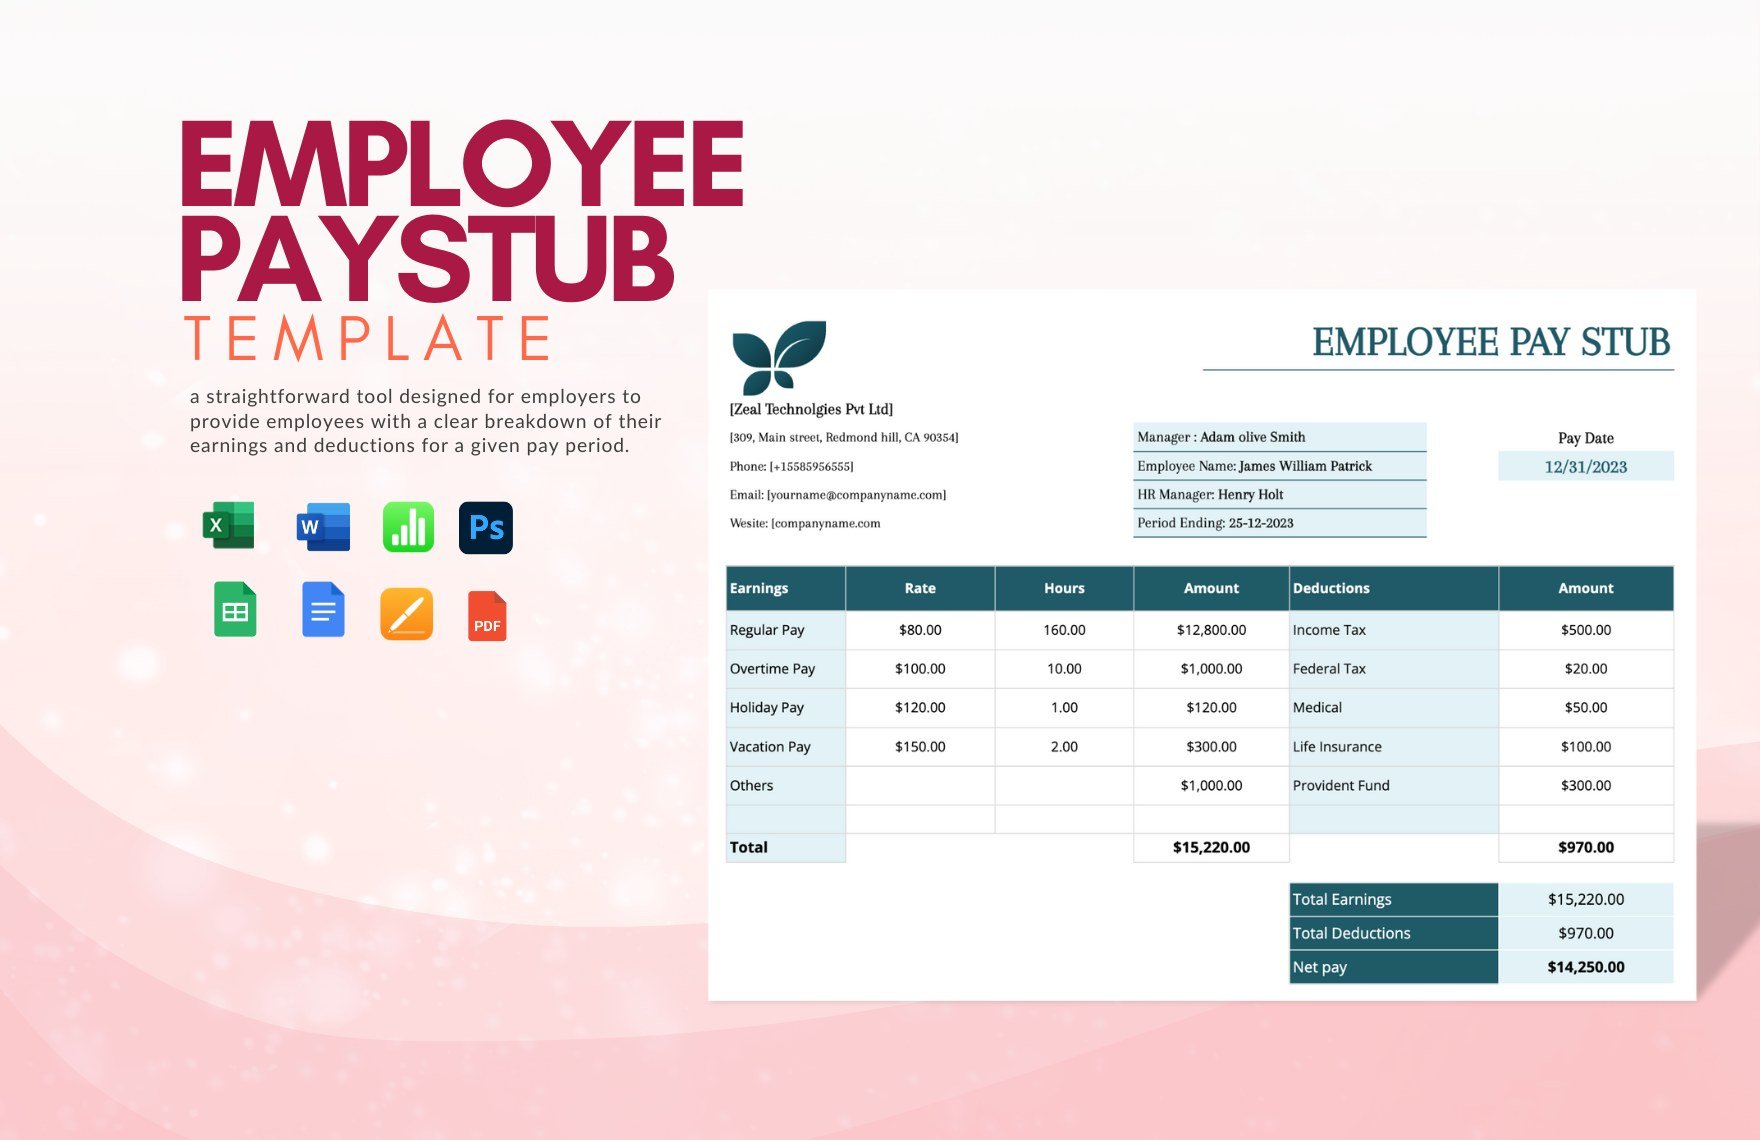 Employee Pay Stub Template in Word, Google Docs, Excel, PDF, Google Sheets, PSD, Apple Pages